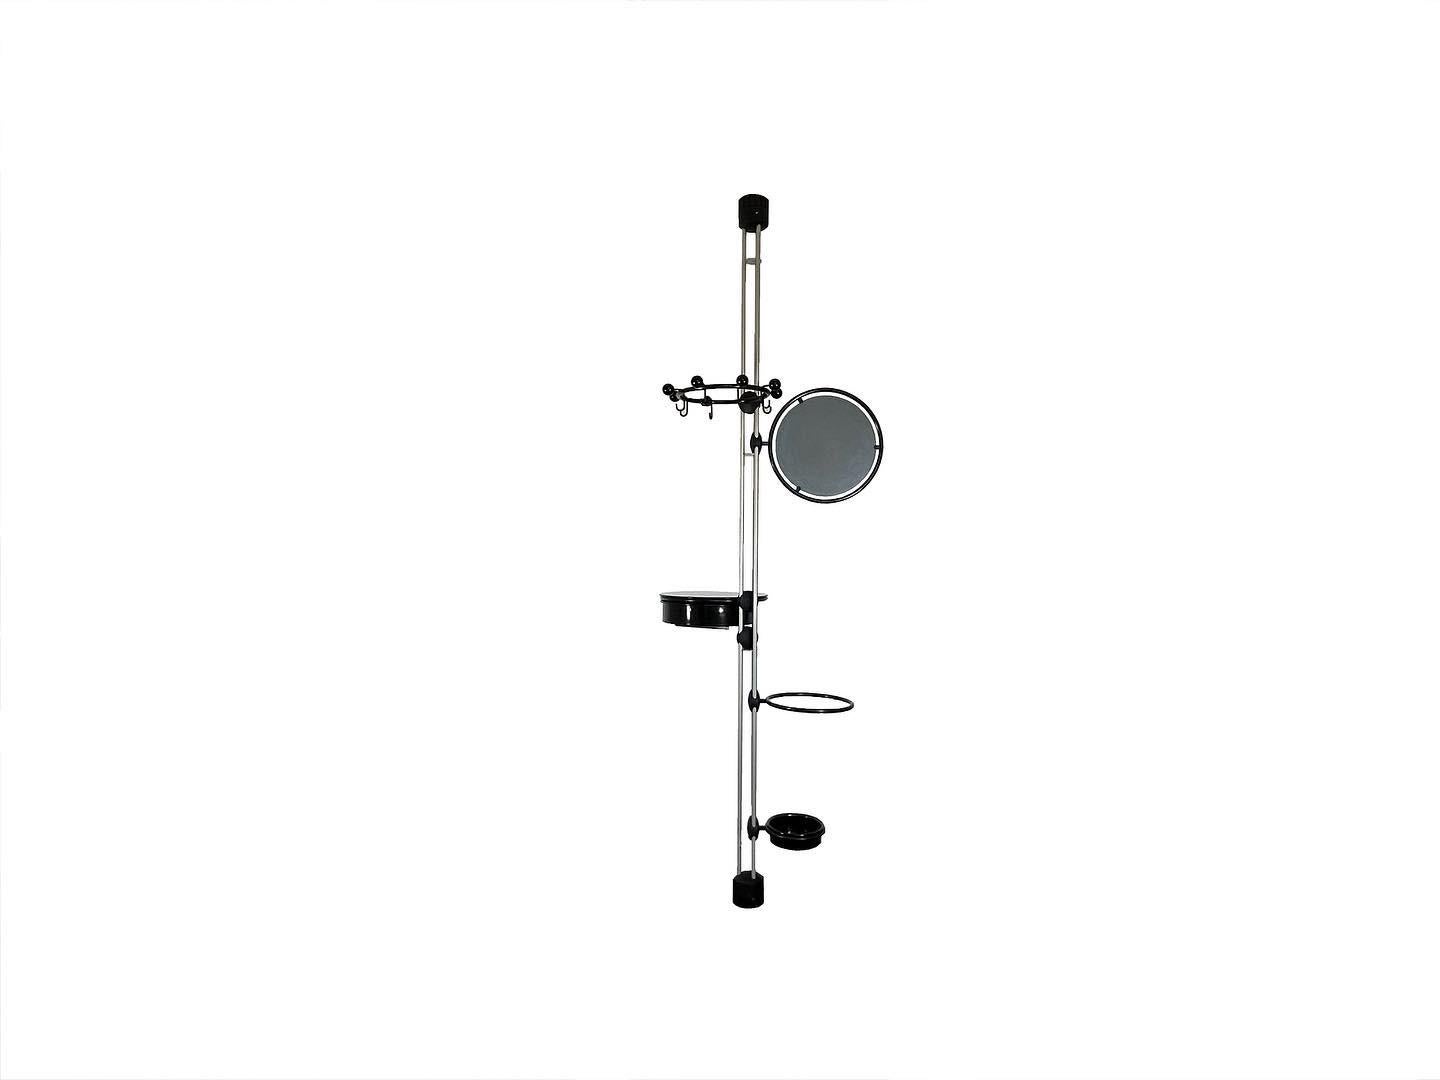 Postmodern telescopic coat stand. 

manufactured by Porada Arredi, around 1980.

A very unique and multifunctional coat hanger with umbrella stand, including a small desk with pivoting drawer, a mirror and coat hanger for up to seven jackets or